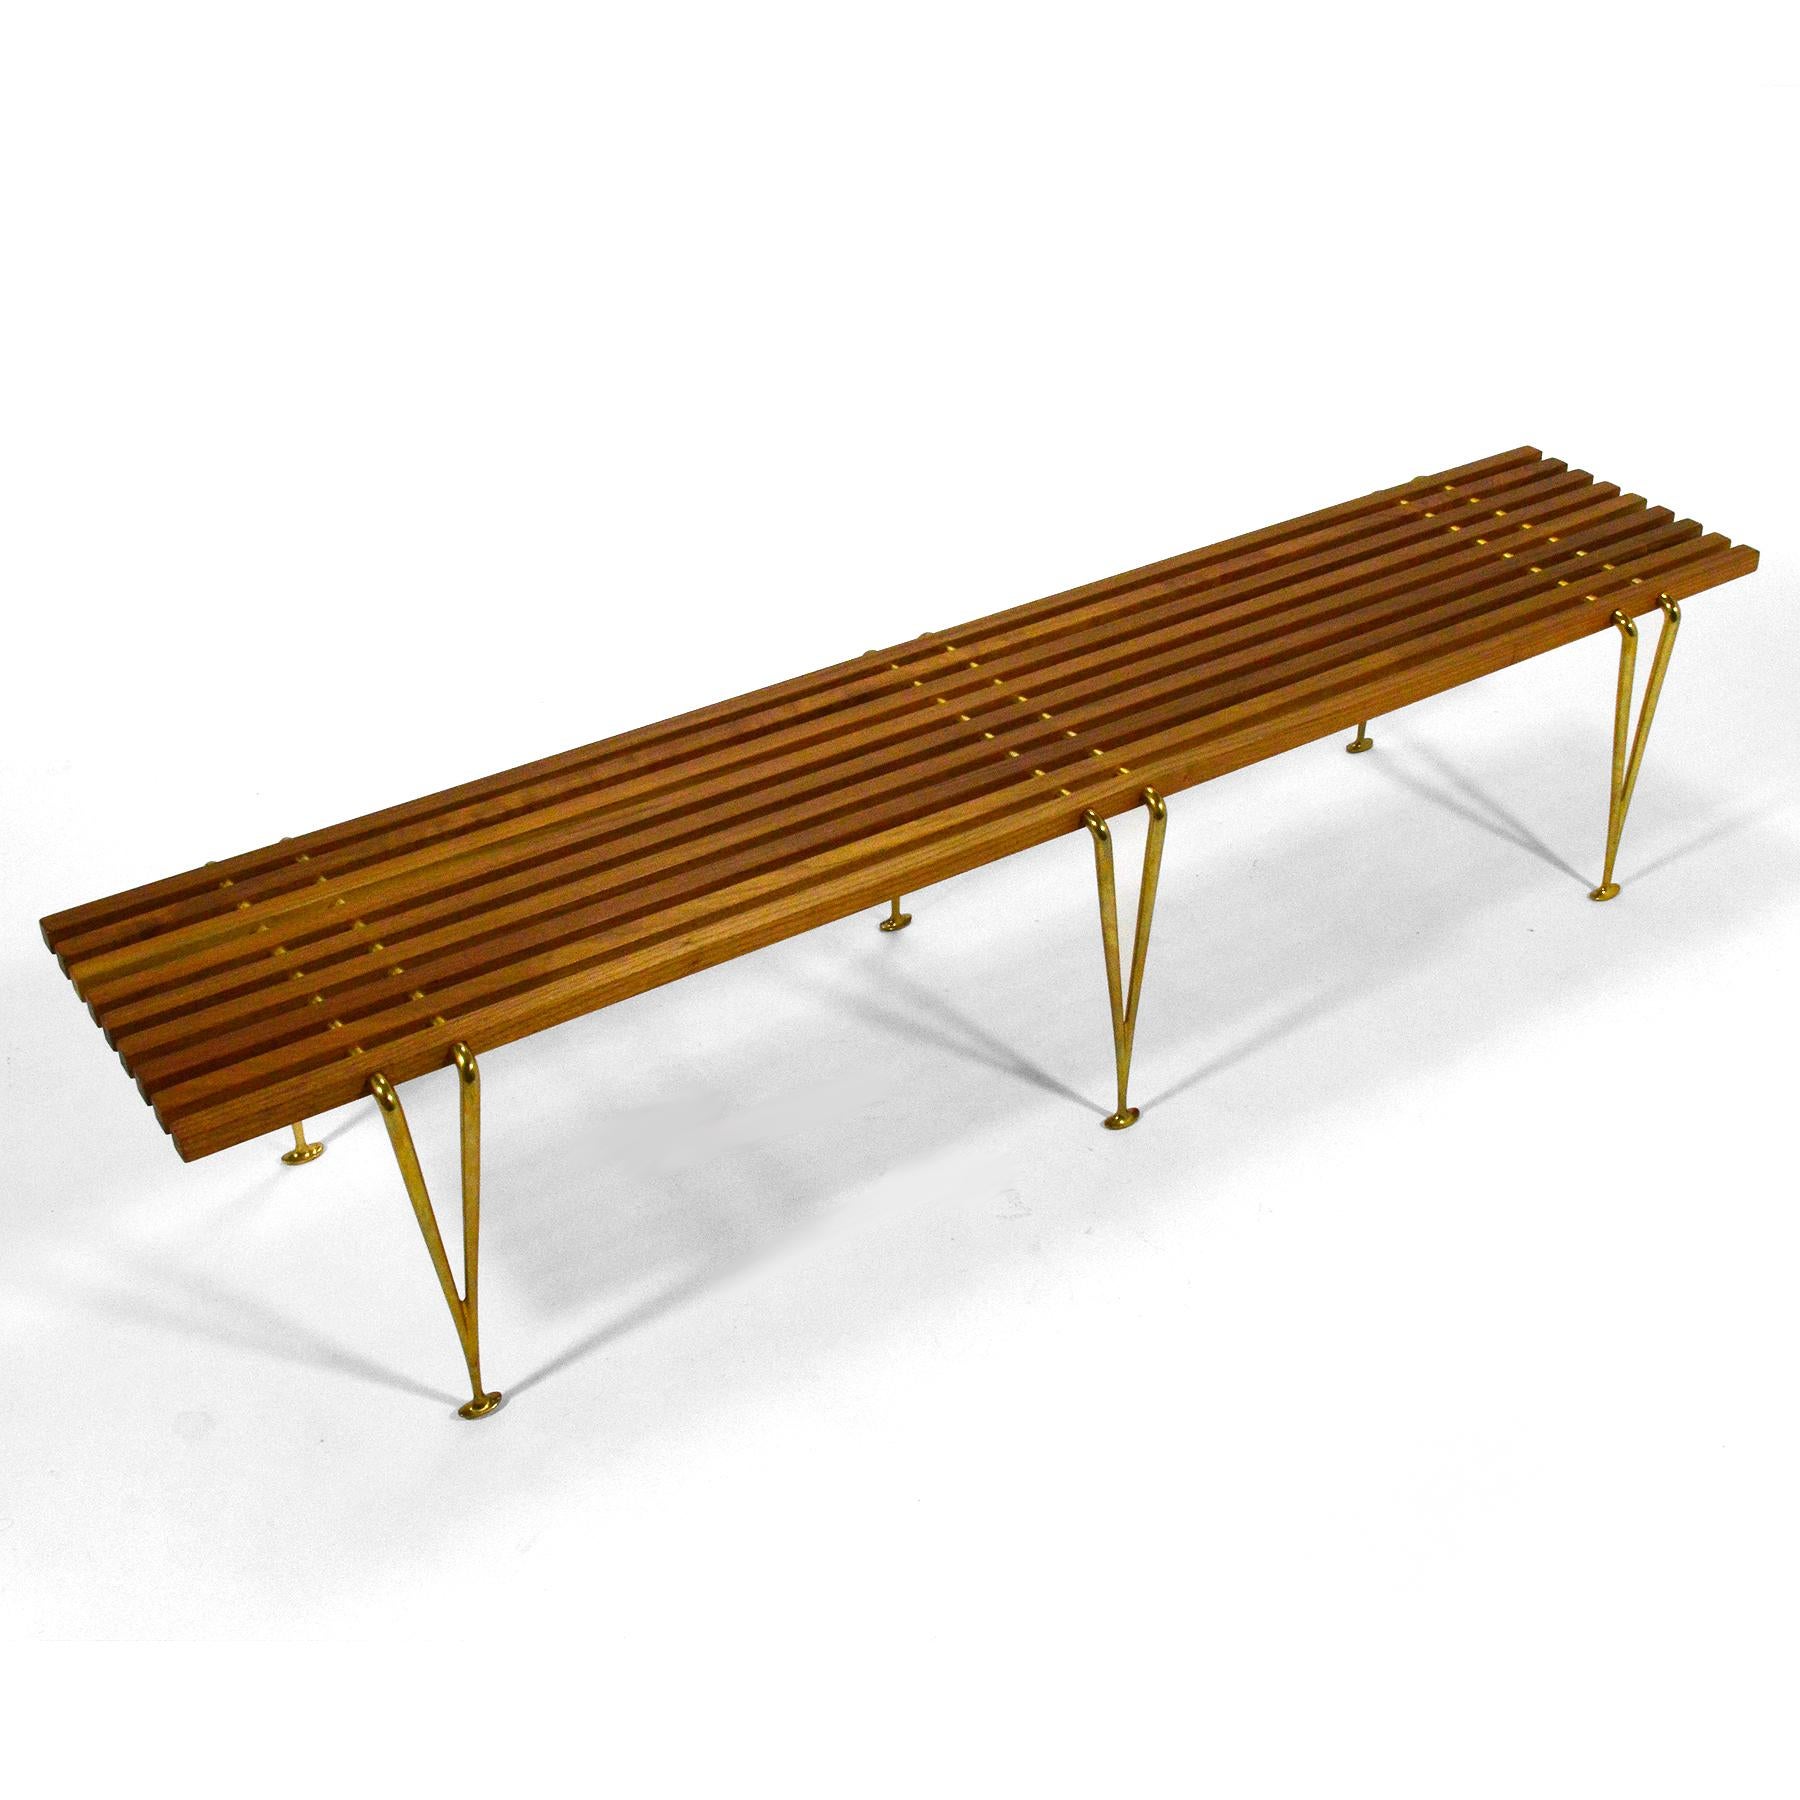 A beautiful example of an important design by artist, engineer, and designer Hugh Acton. Designed in 1954, the suspension beam bench features cherrywood slats connected to elegant cast brass legs. This example is hand signed.